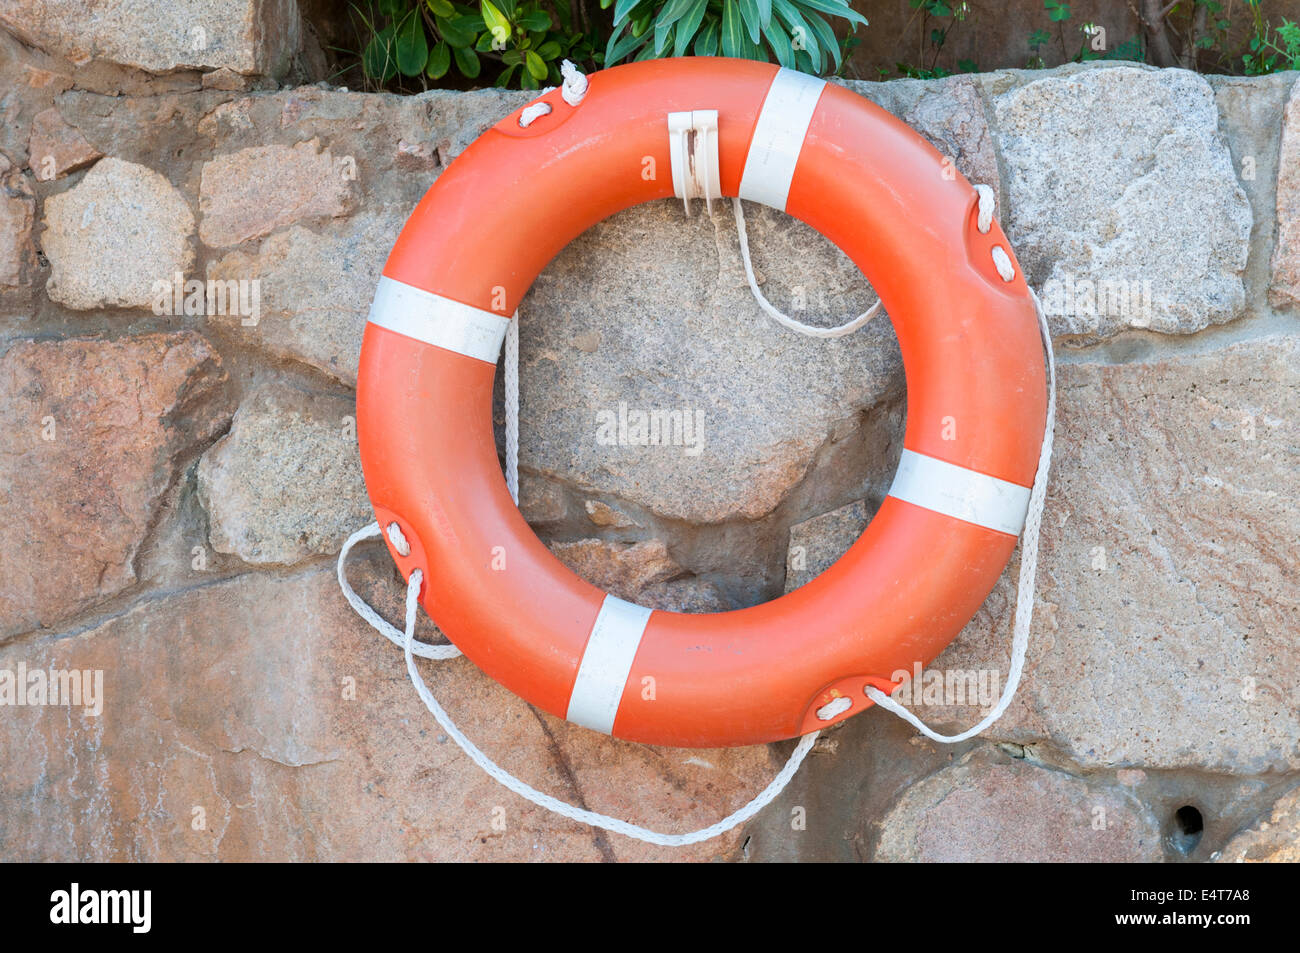 Round buoy lifesaver for anyone who does not drown Stock Photo